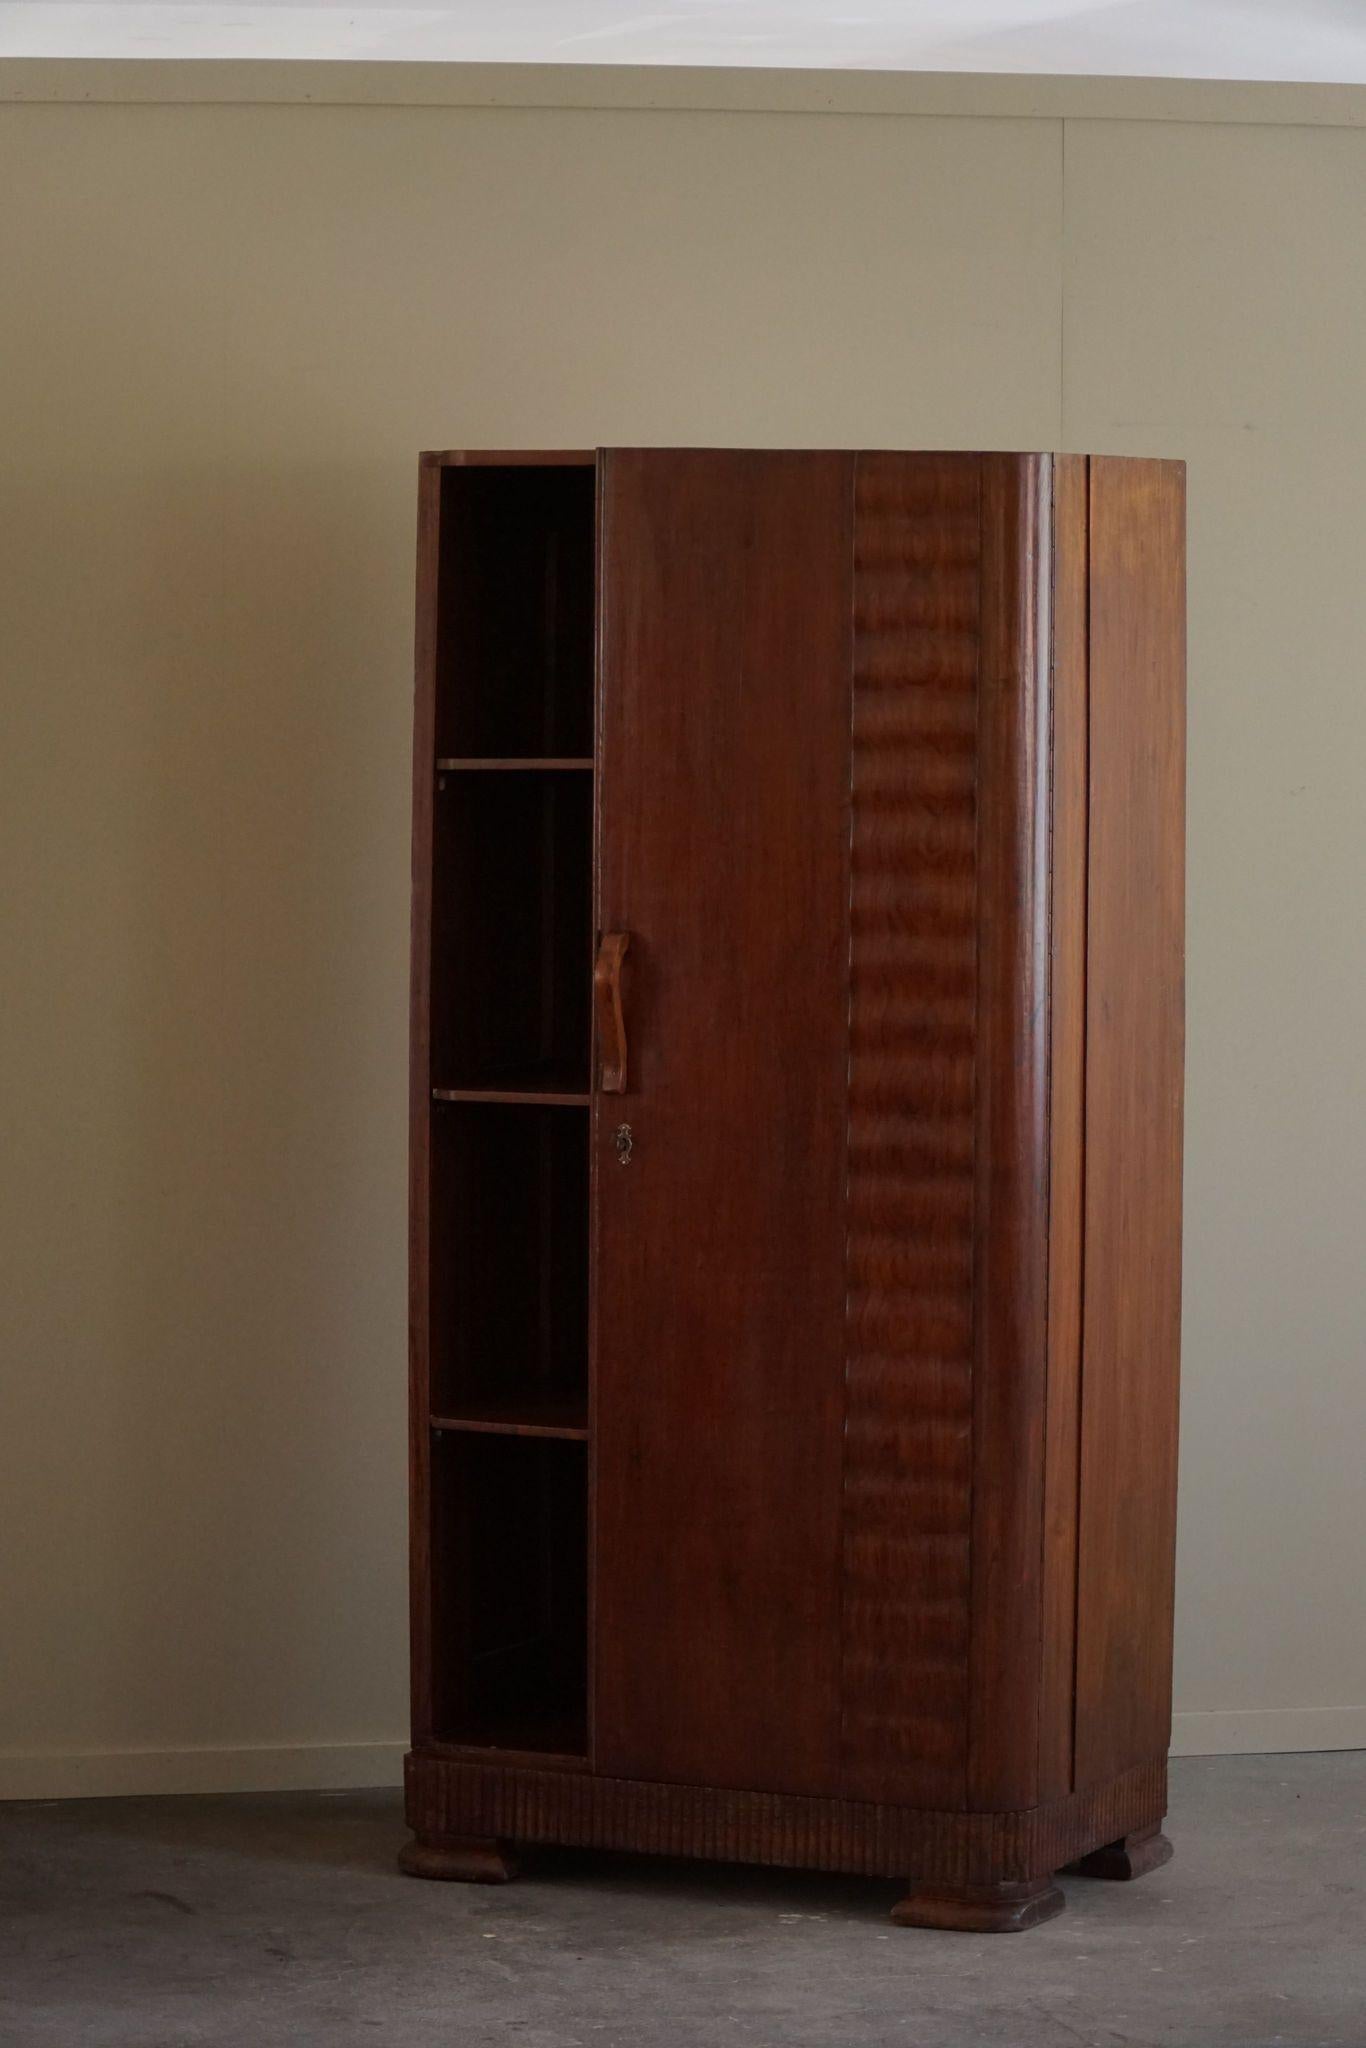 20th Century Art Deco, Sculptural Narrow Oak Cabinet, Made by an Italian Cabinetmaker, 1940s  For Sale